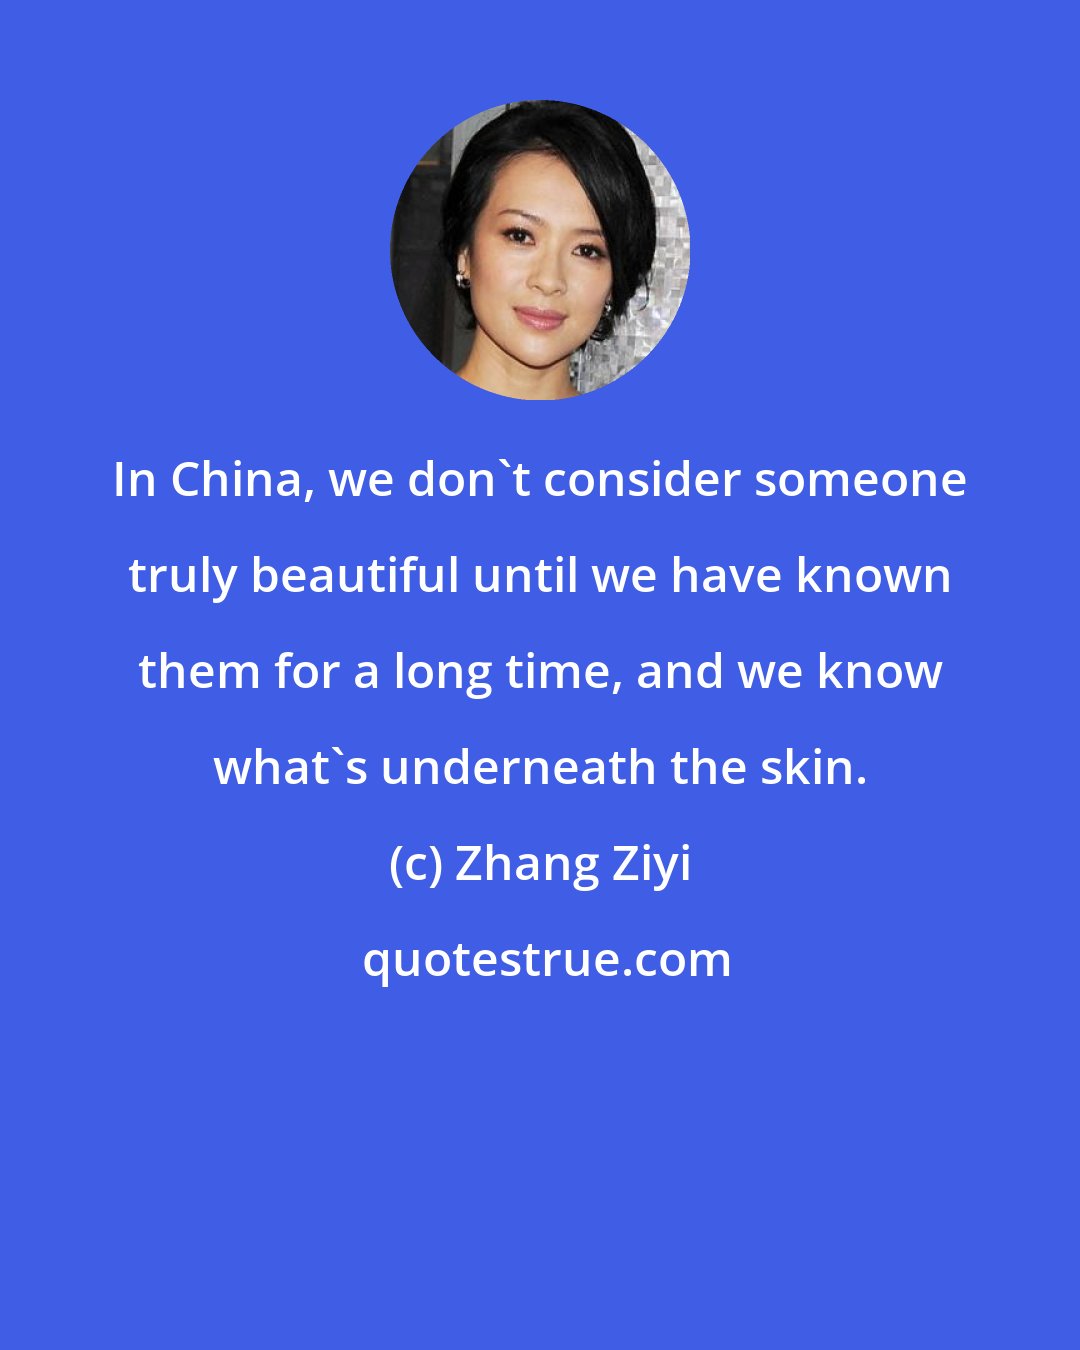 Zhang Ziyi: In China, we don't consider someone truly beautiful until we have known them for a long time, and we know what's underneath the skin.